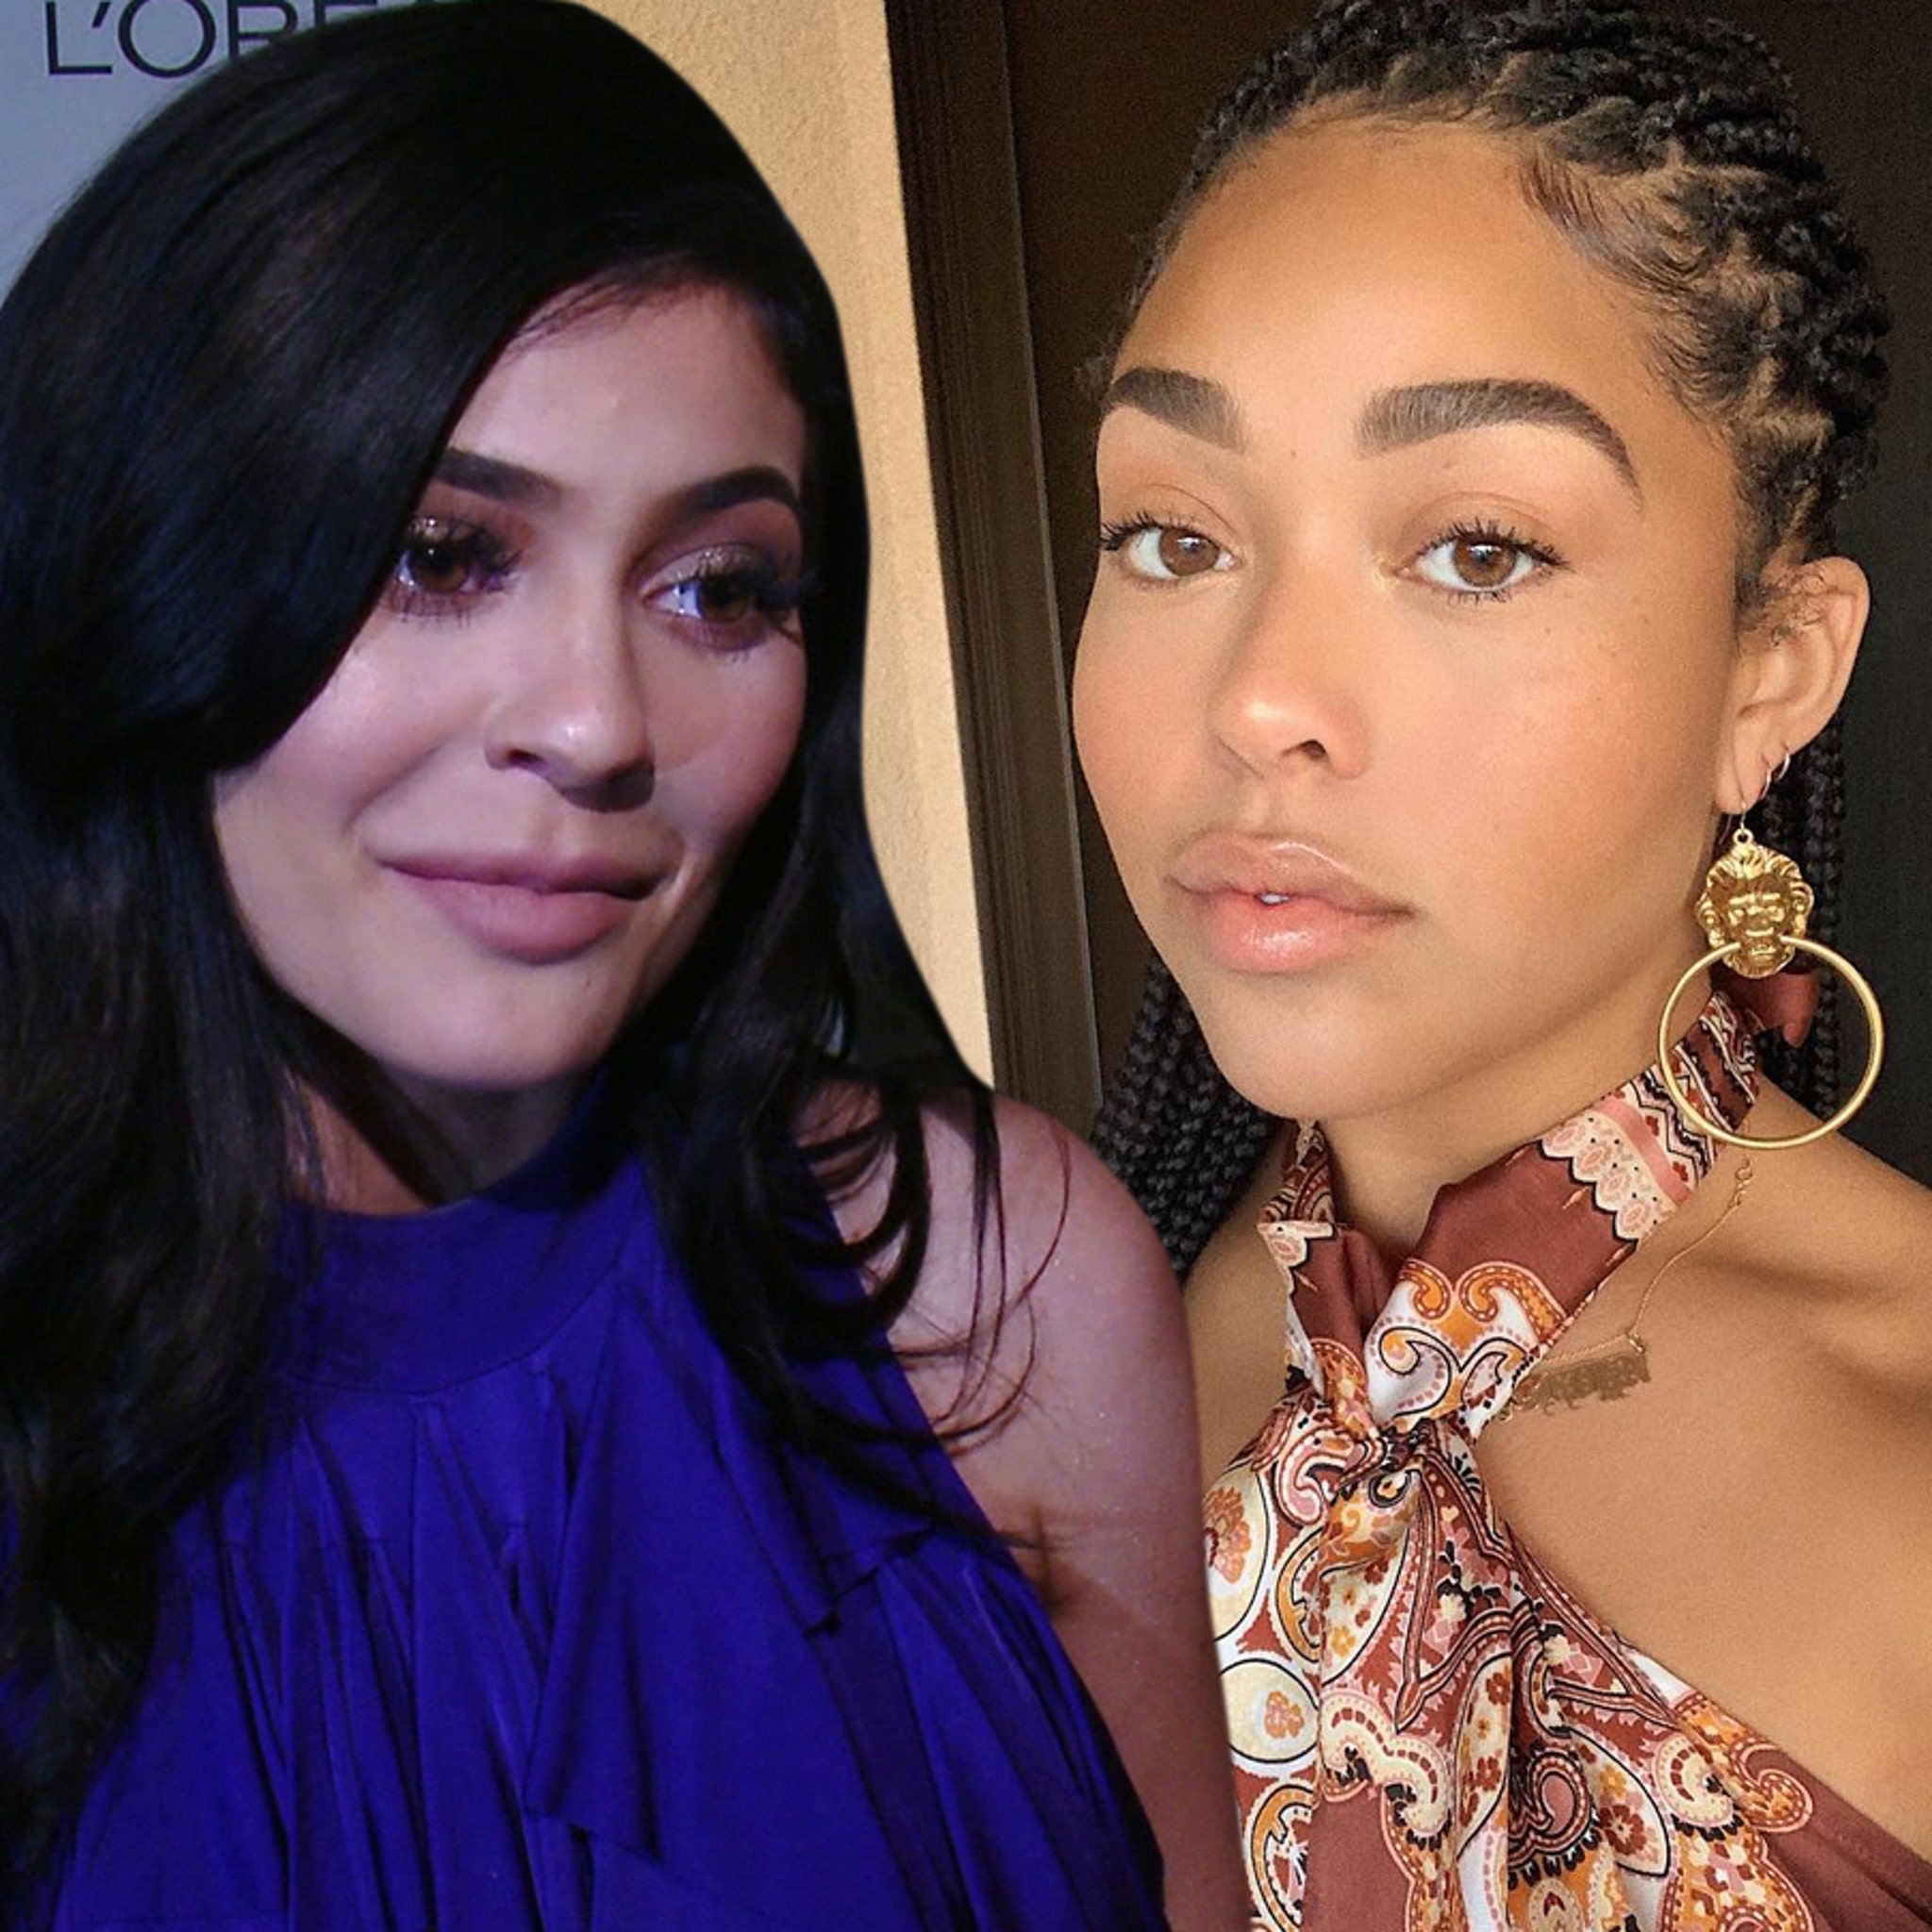 Kardashian nemesis Jordyn Woods takes a swipe at famous family with launch  of new business